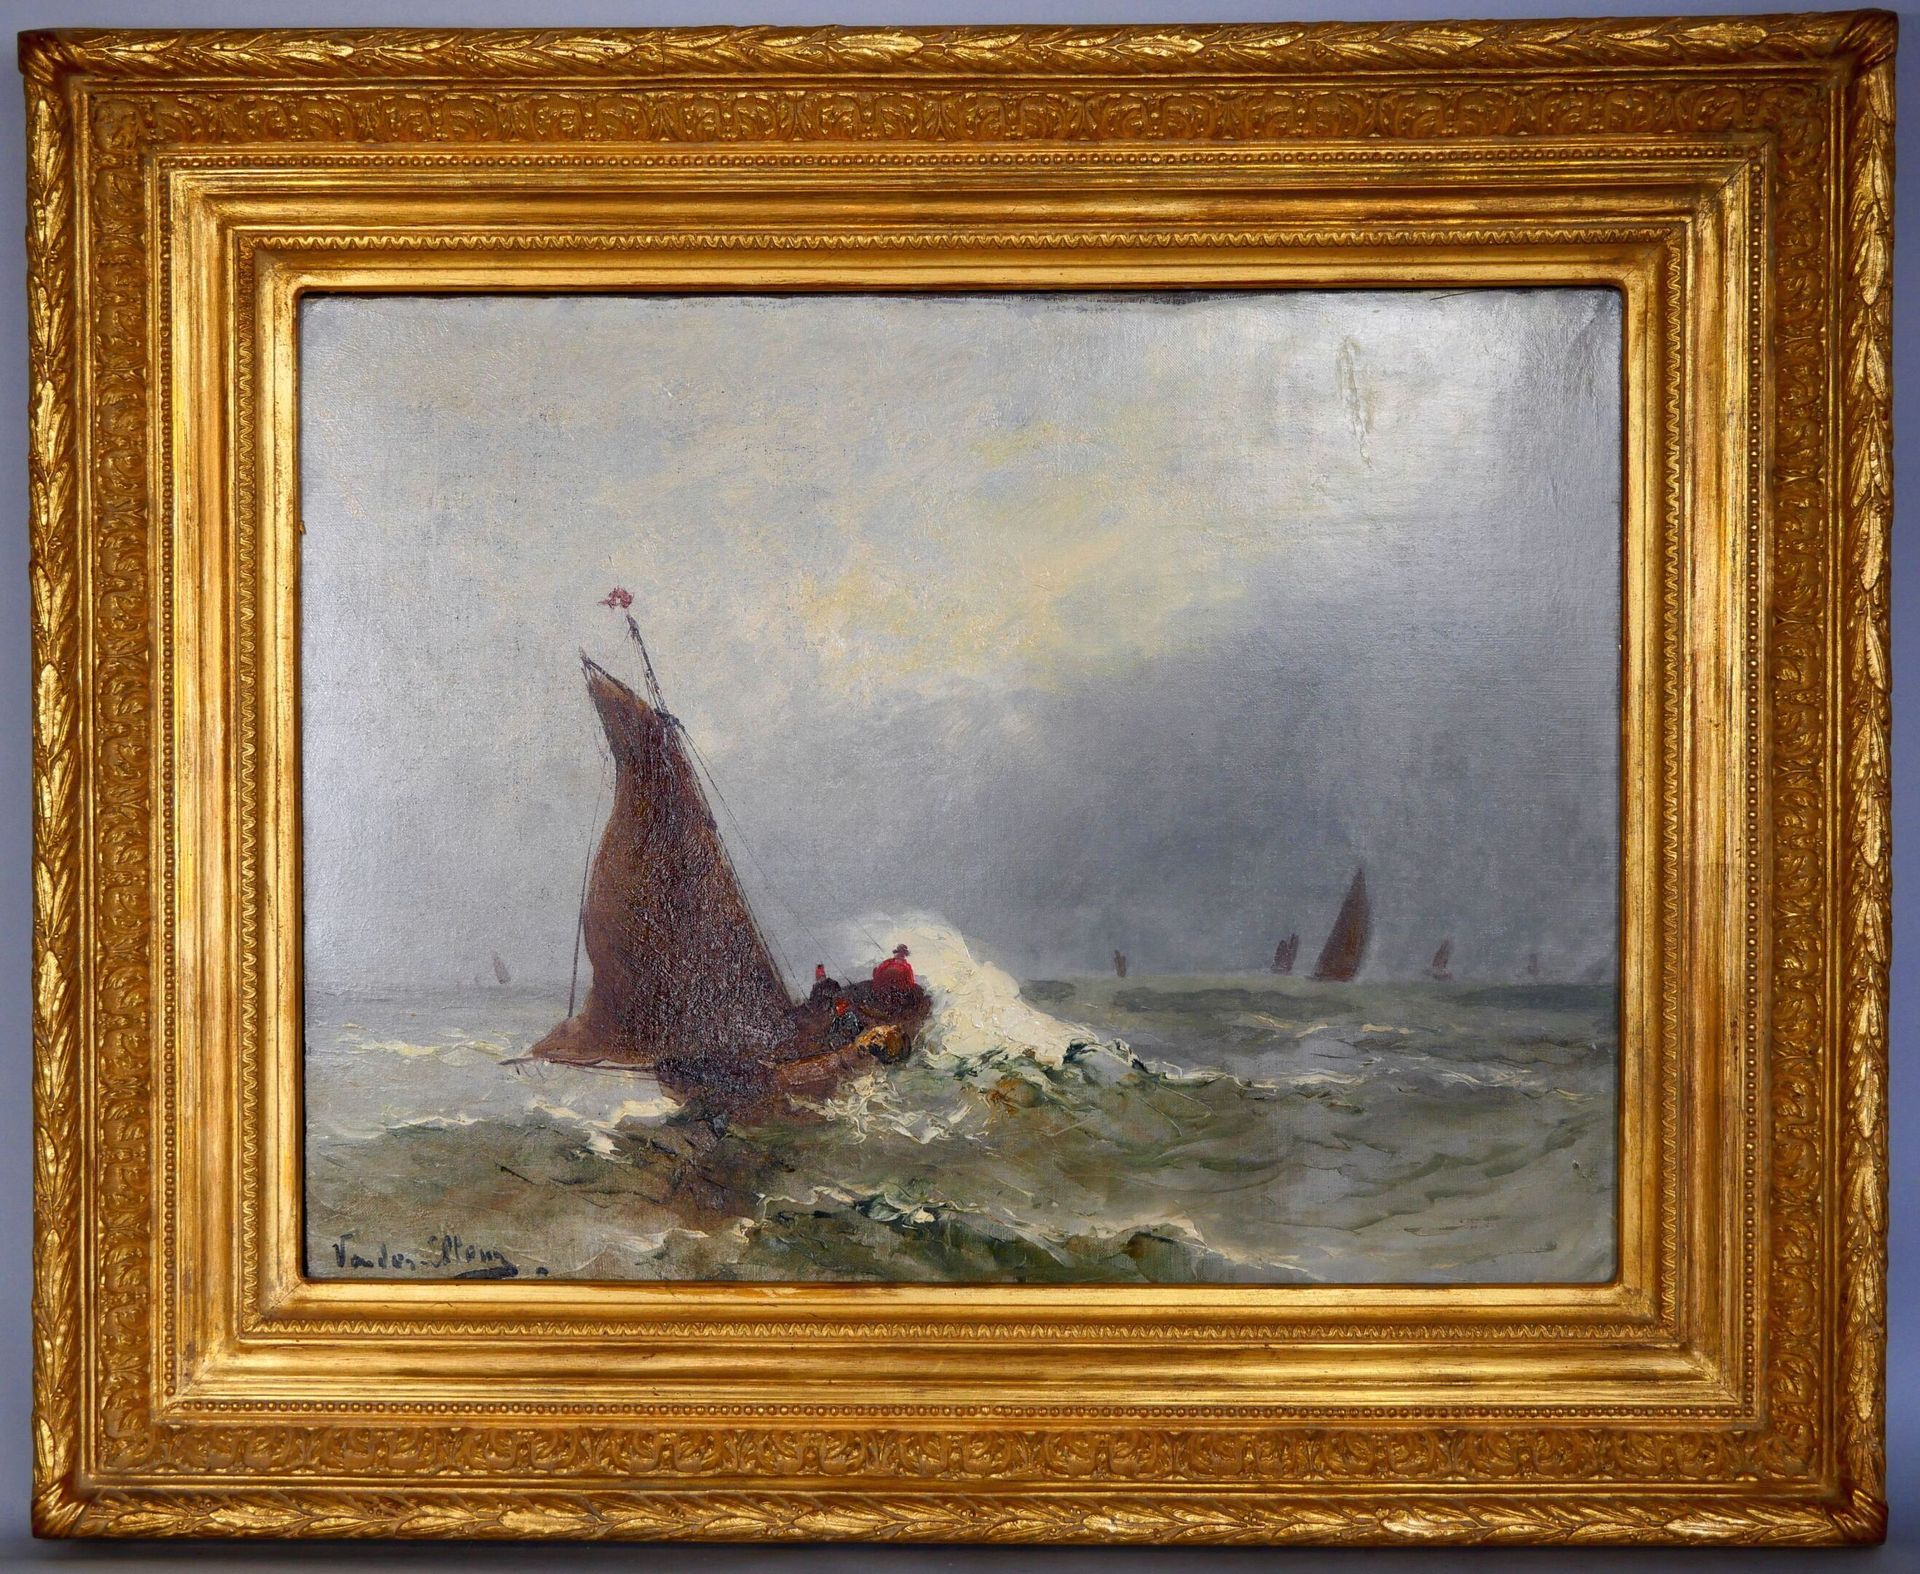 Null Dutch school of the 19th century
Boat in the storm
Oil on canvas. Bears an &hellip;